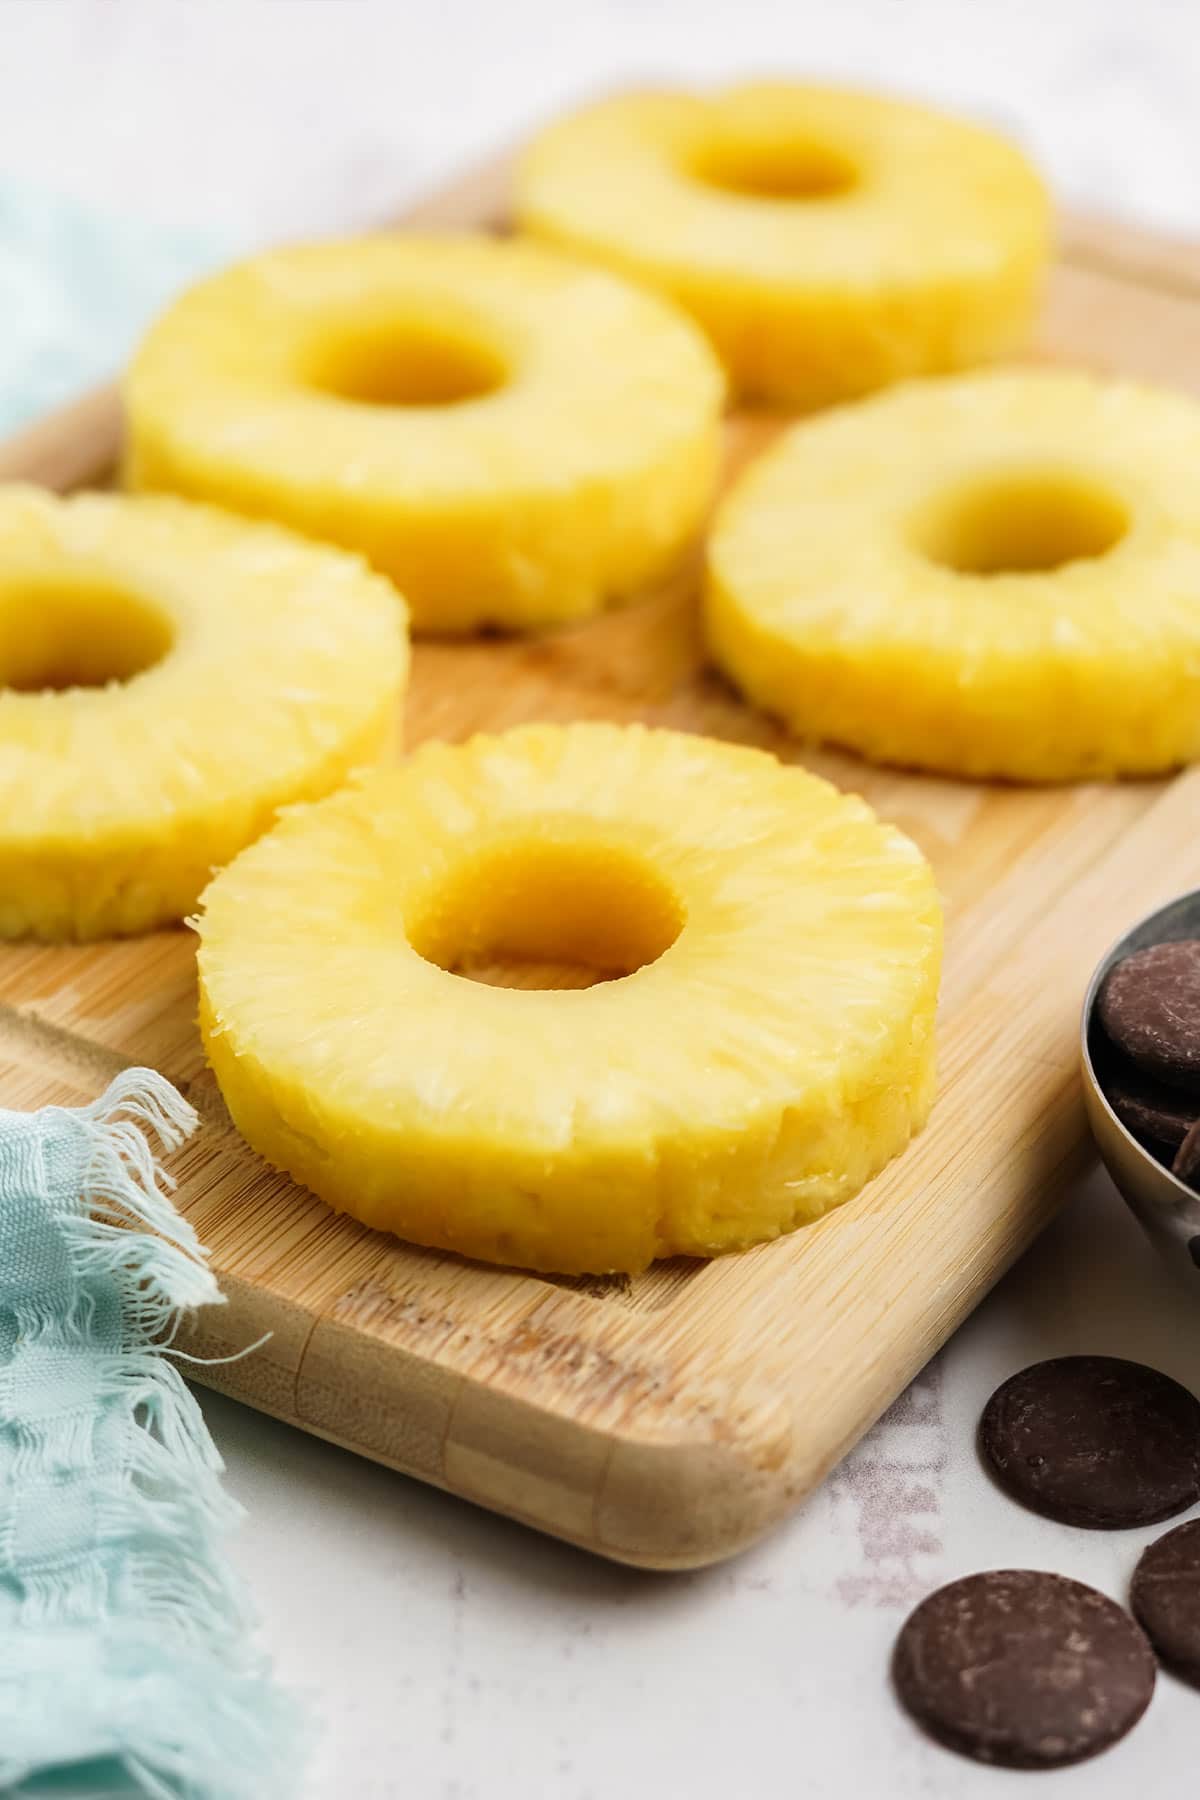 Pineapple rings laying on a cutting board.